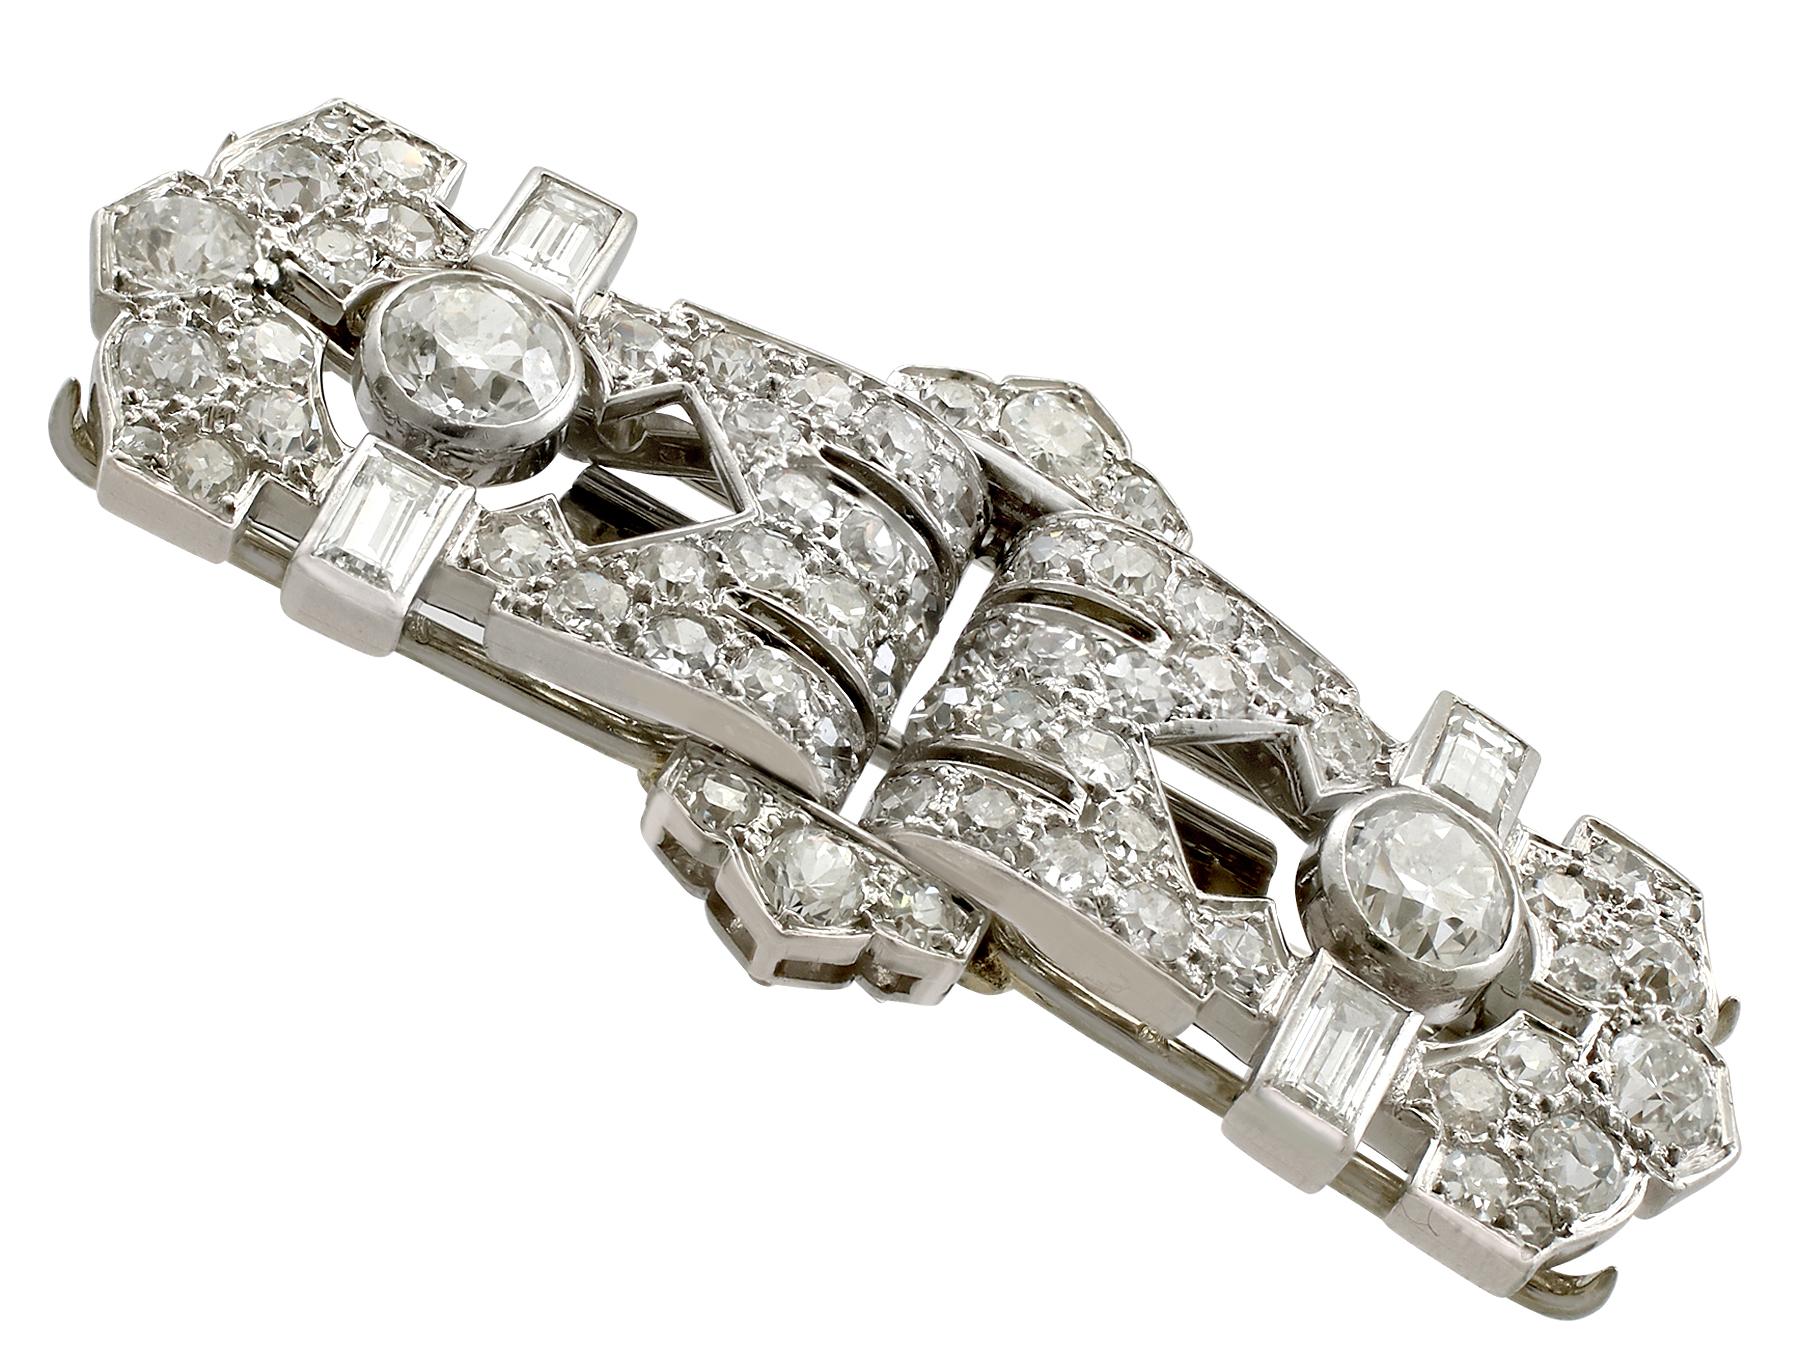 A stunning antique French Art Deco 2.58 carat diamond and platinum, 18 karat and 12 karat white gold duette brooch; part of our diverse antique jewellery and estate jewelry collections.

This stunning, fine and impressive antique diamond brooch has